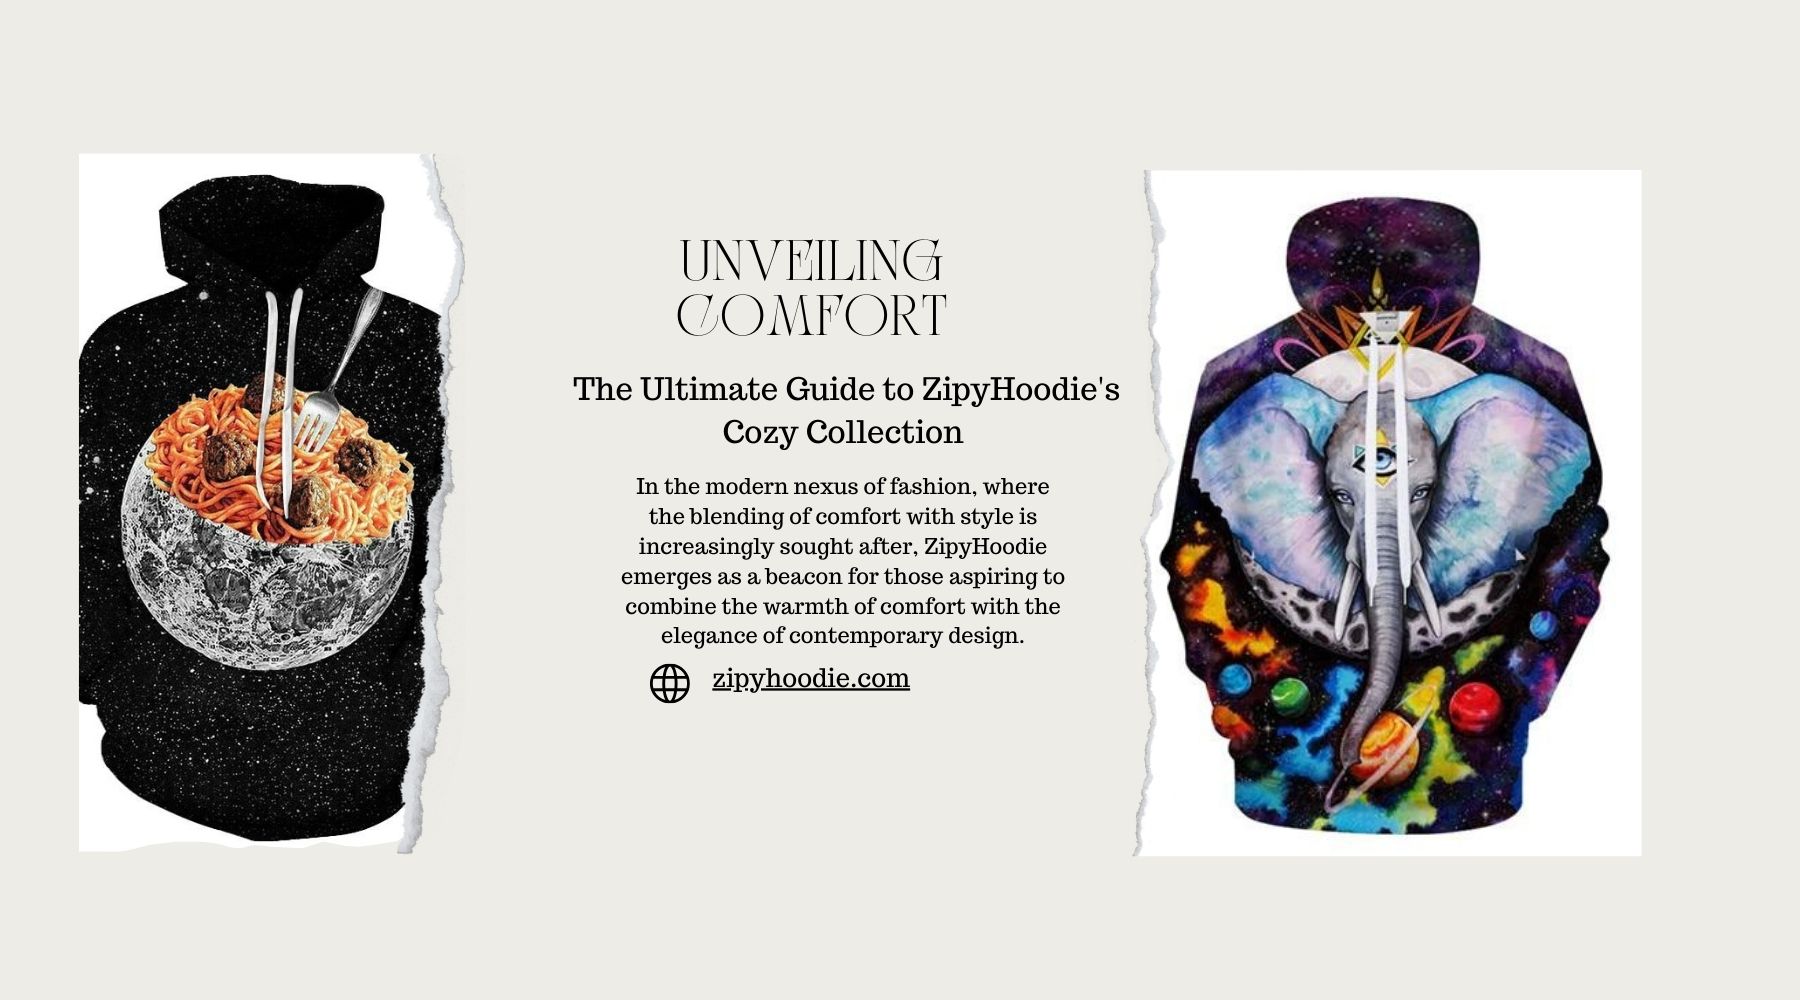 Unveiling Comfort: The Ultimate Guide to Zipy Hoodie's Cozy Collection